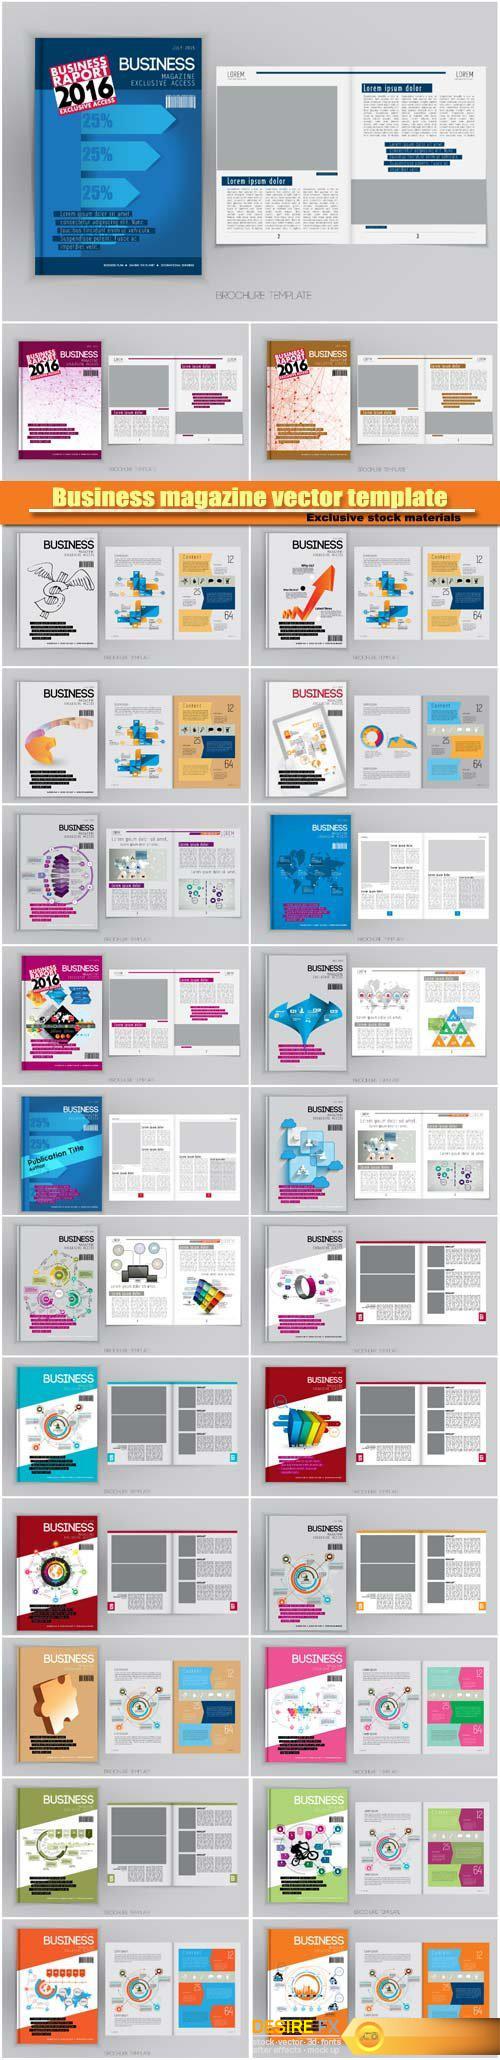 Business magazine exclusive vector template